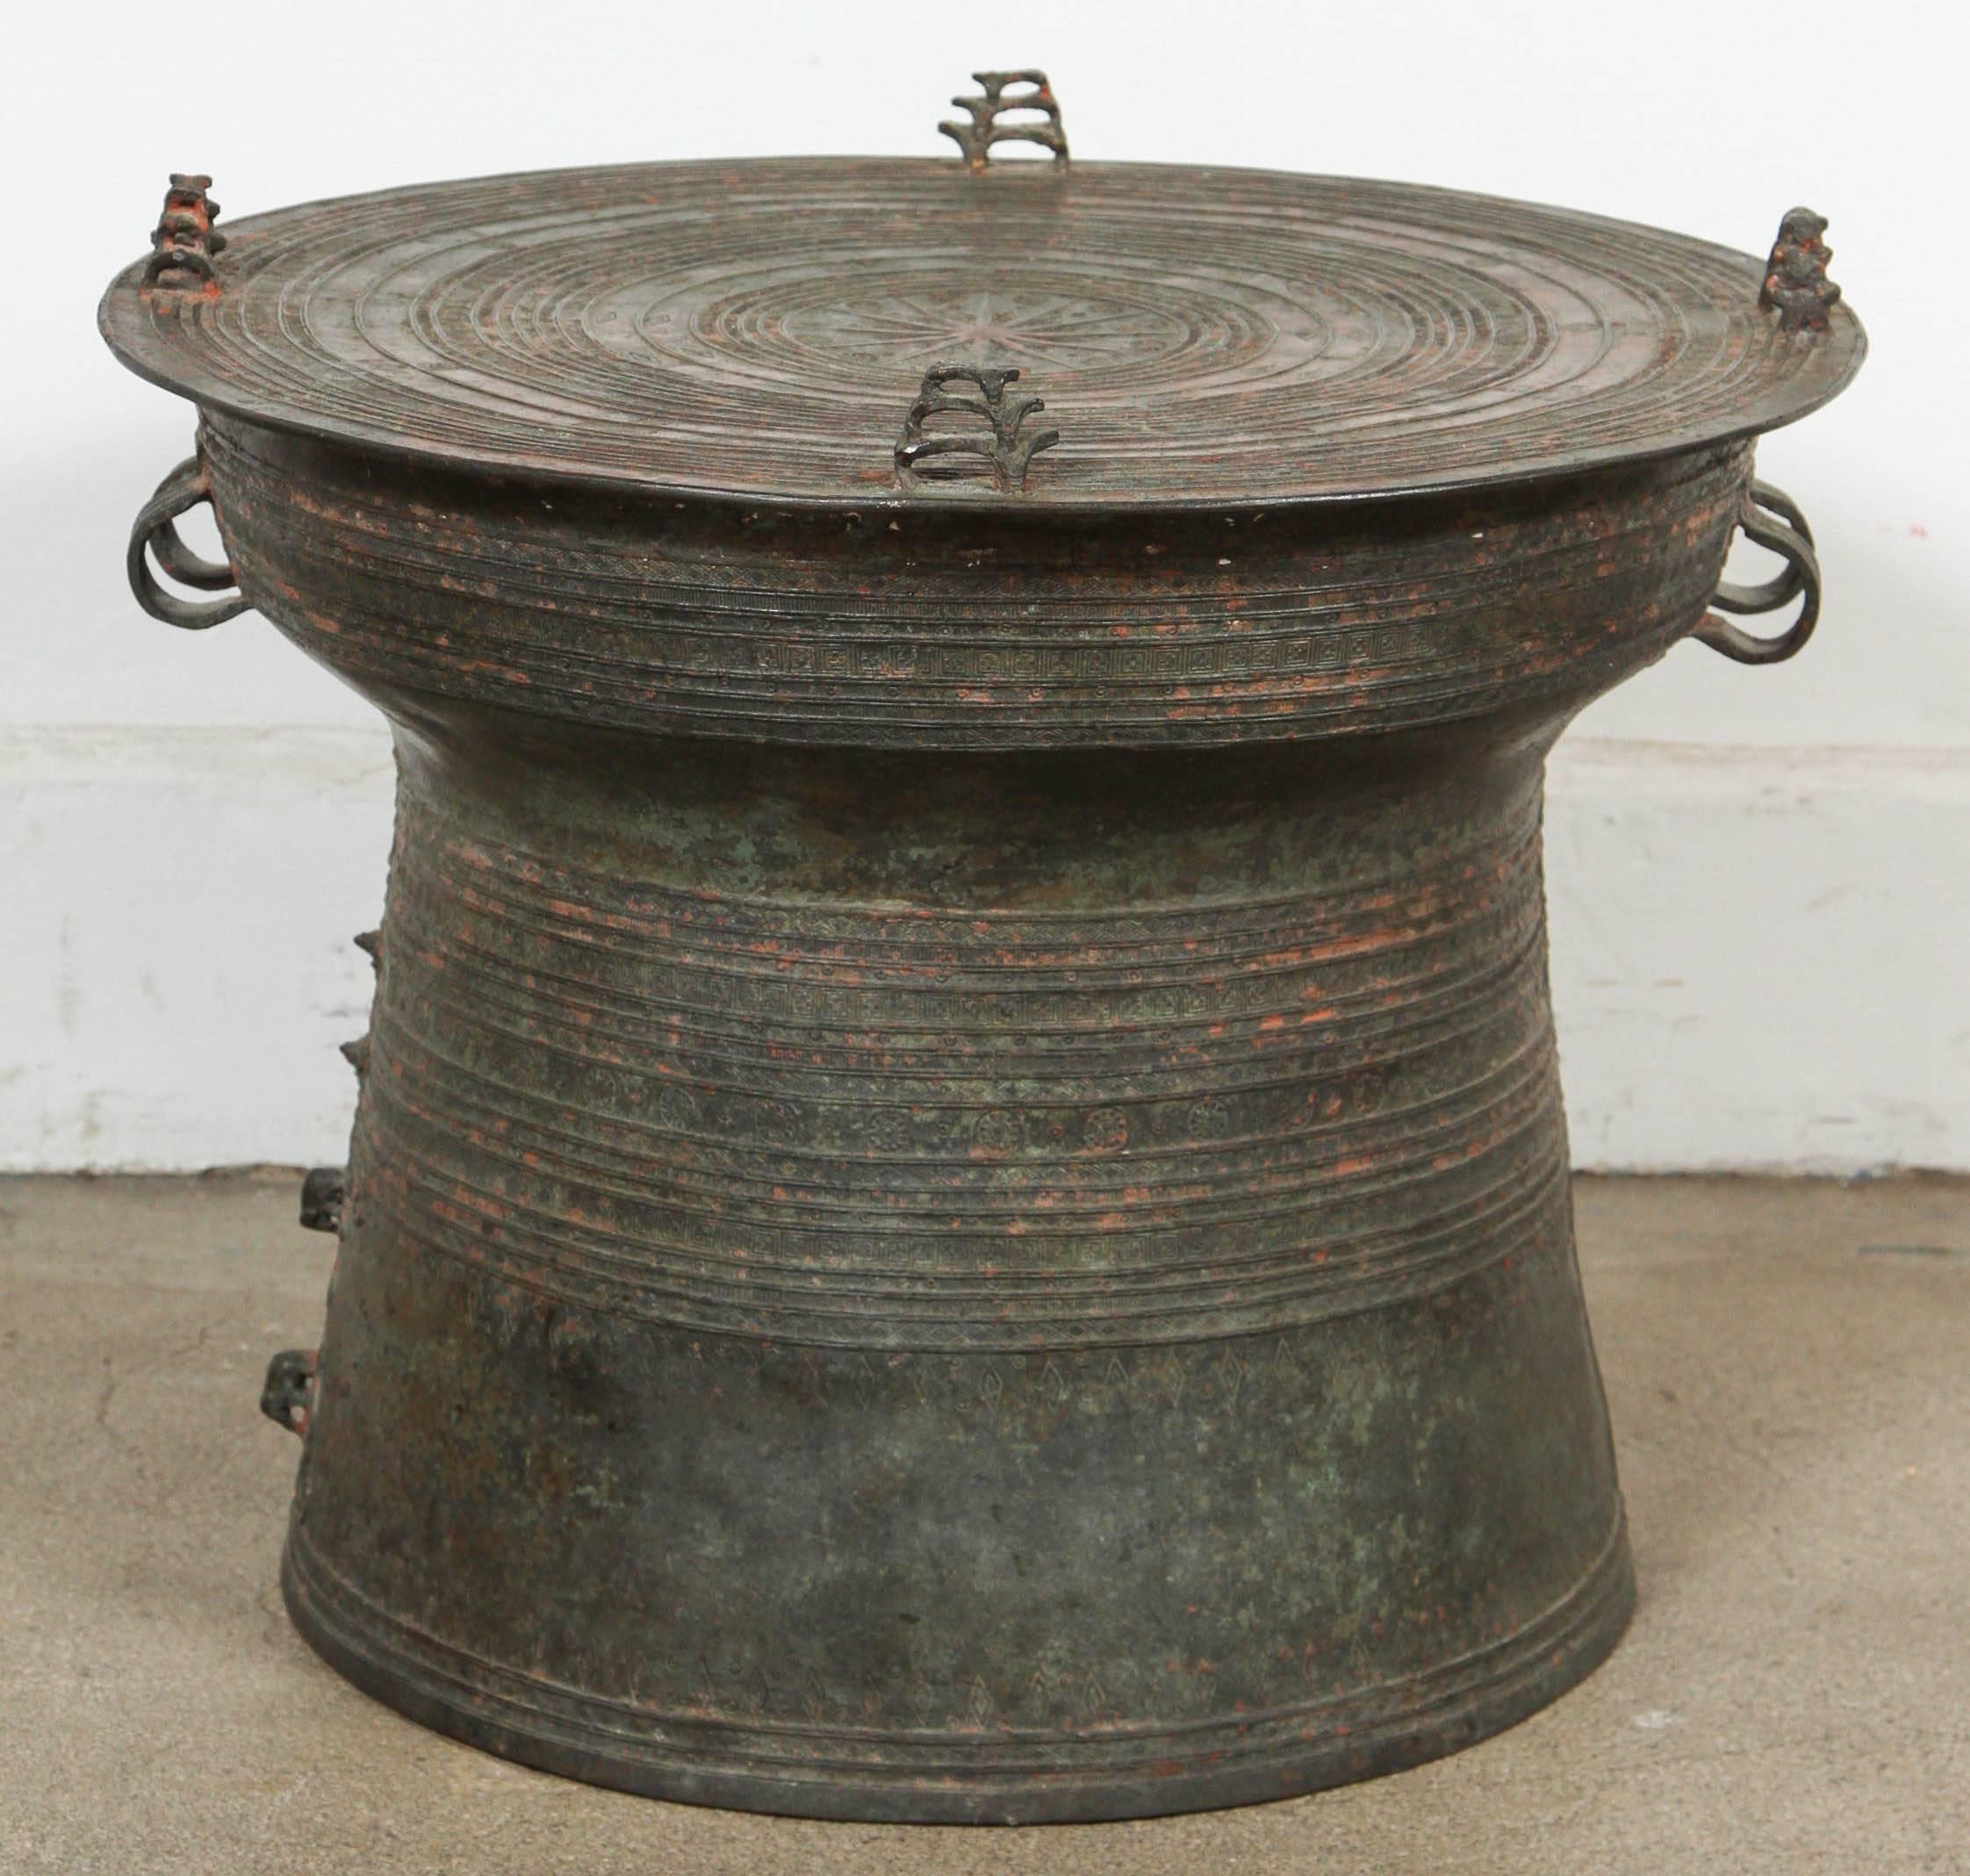 Asian cast bronze rain drum with the traditional intricate detailing and patterns carved all around both the body and the top.
The top is flat centered with a raised star surrounded by concentric geometric patterned bands and with raised triple